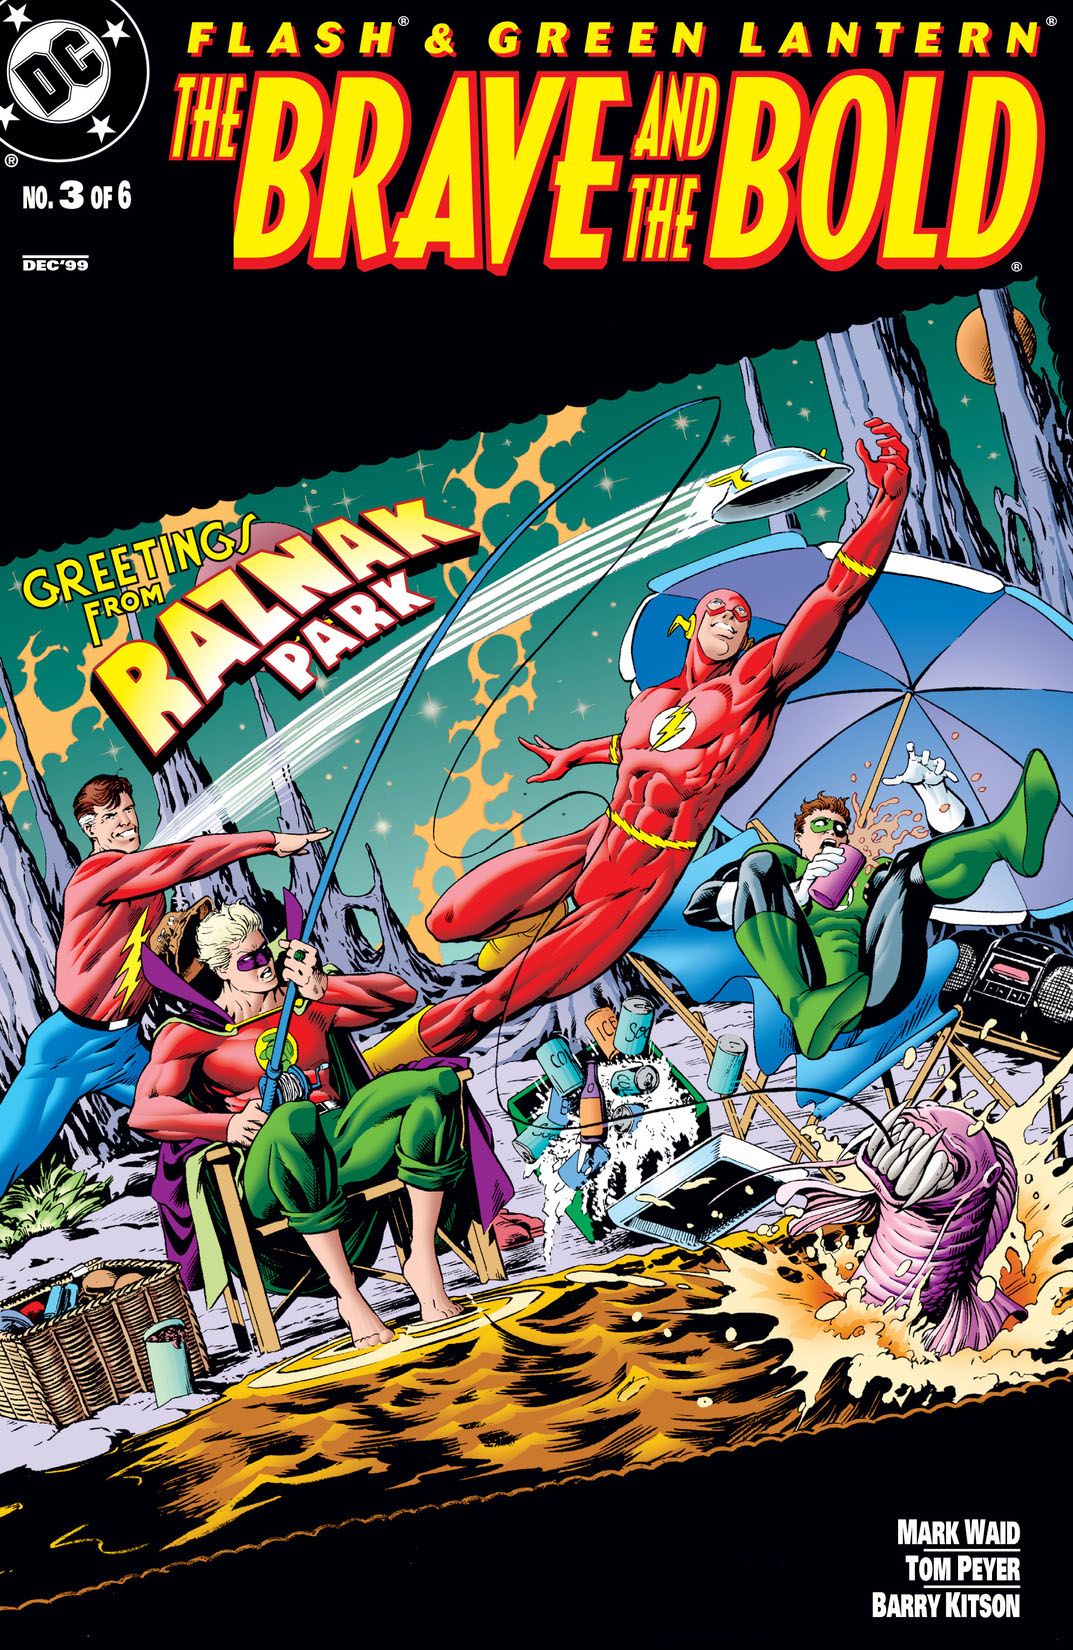 Flash & Green Lantern: The Brave & The Bold #3 preview images